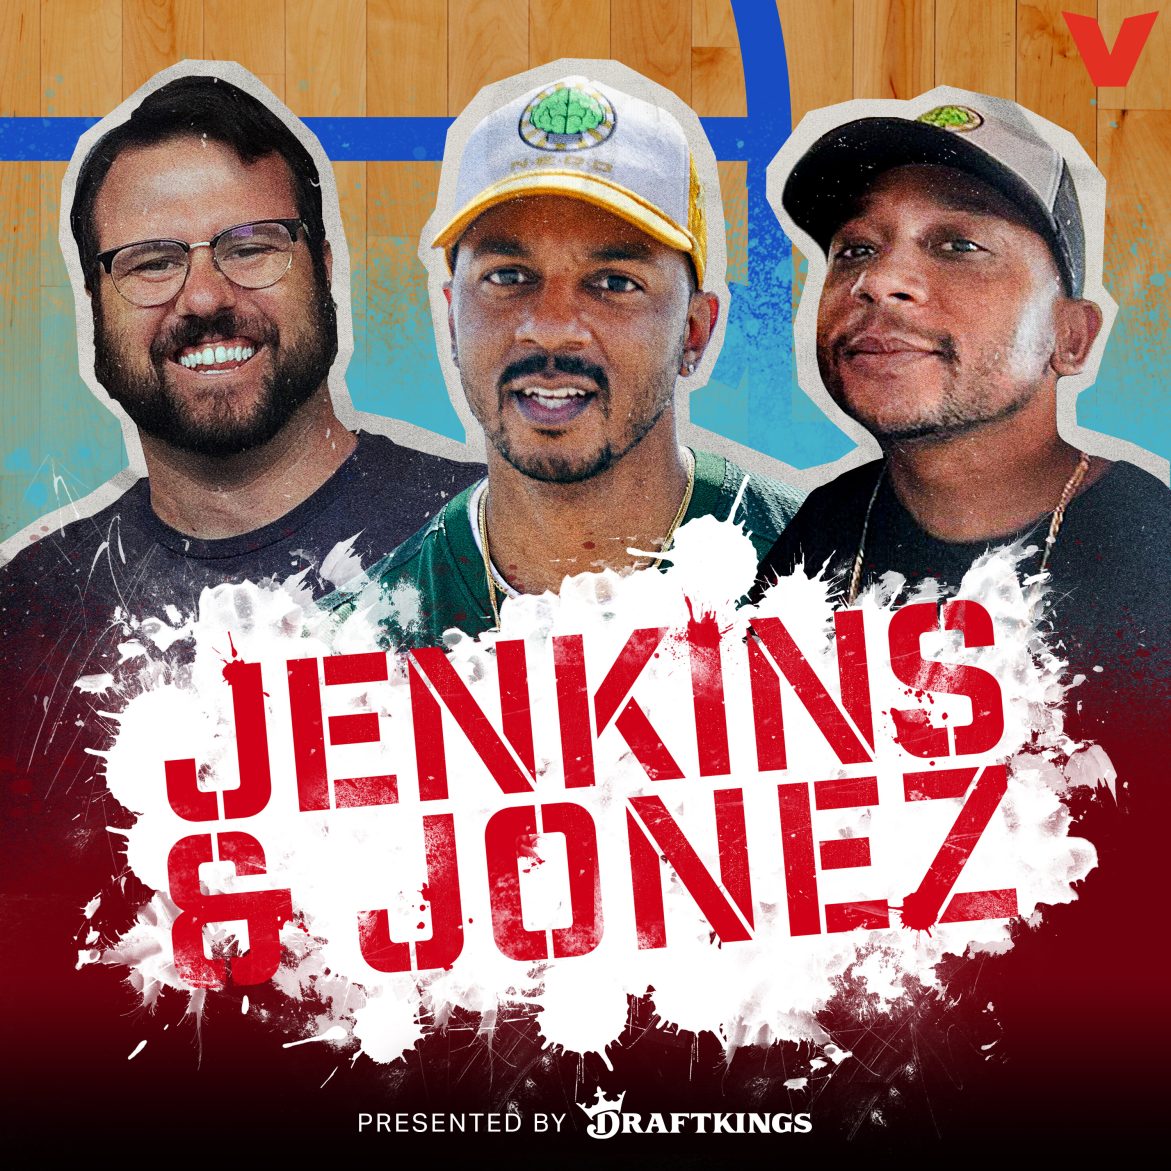 Black Podcasting - Jenkins and Jonez - We’re Talking About “Most Skilled” Again